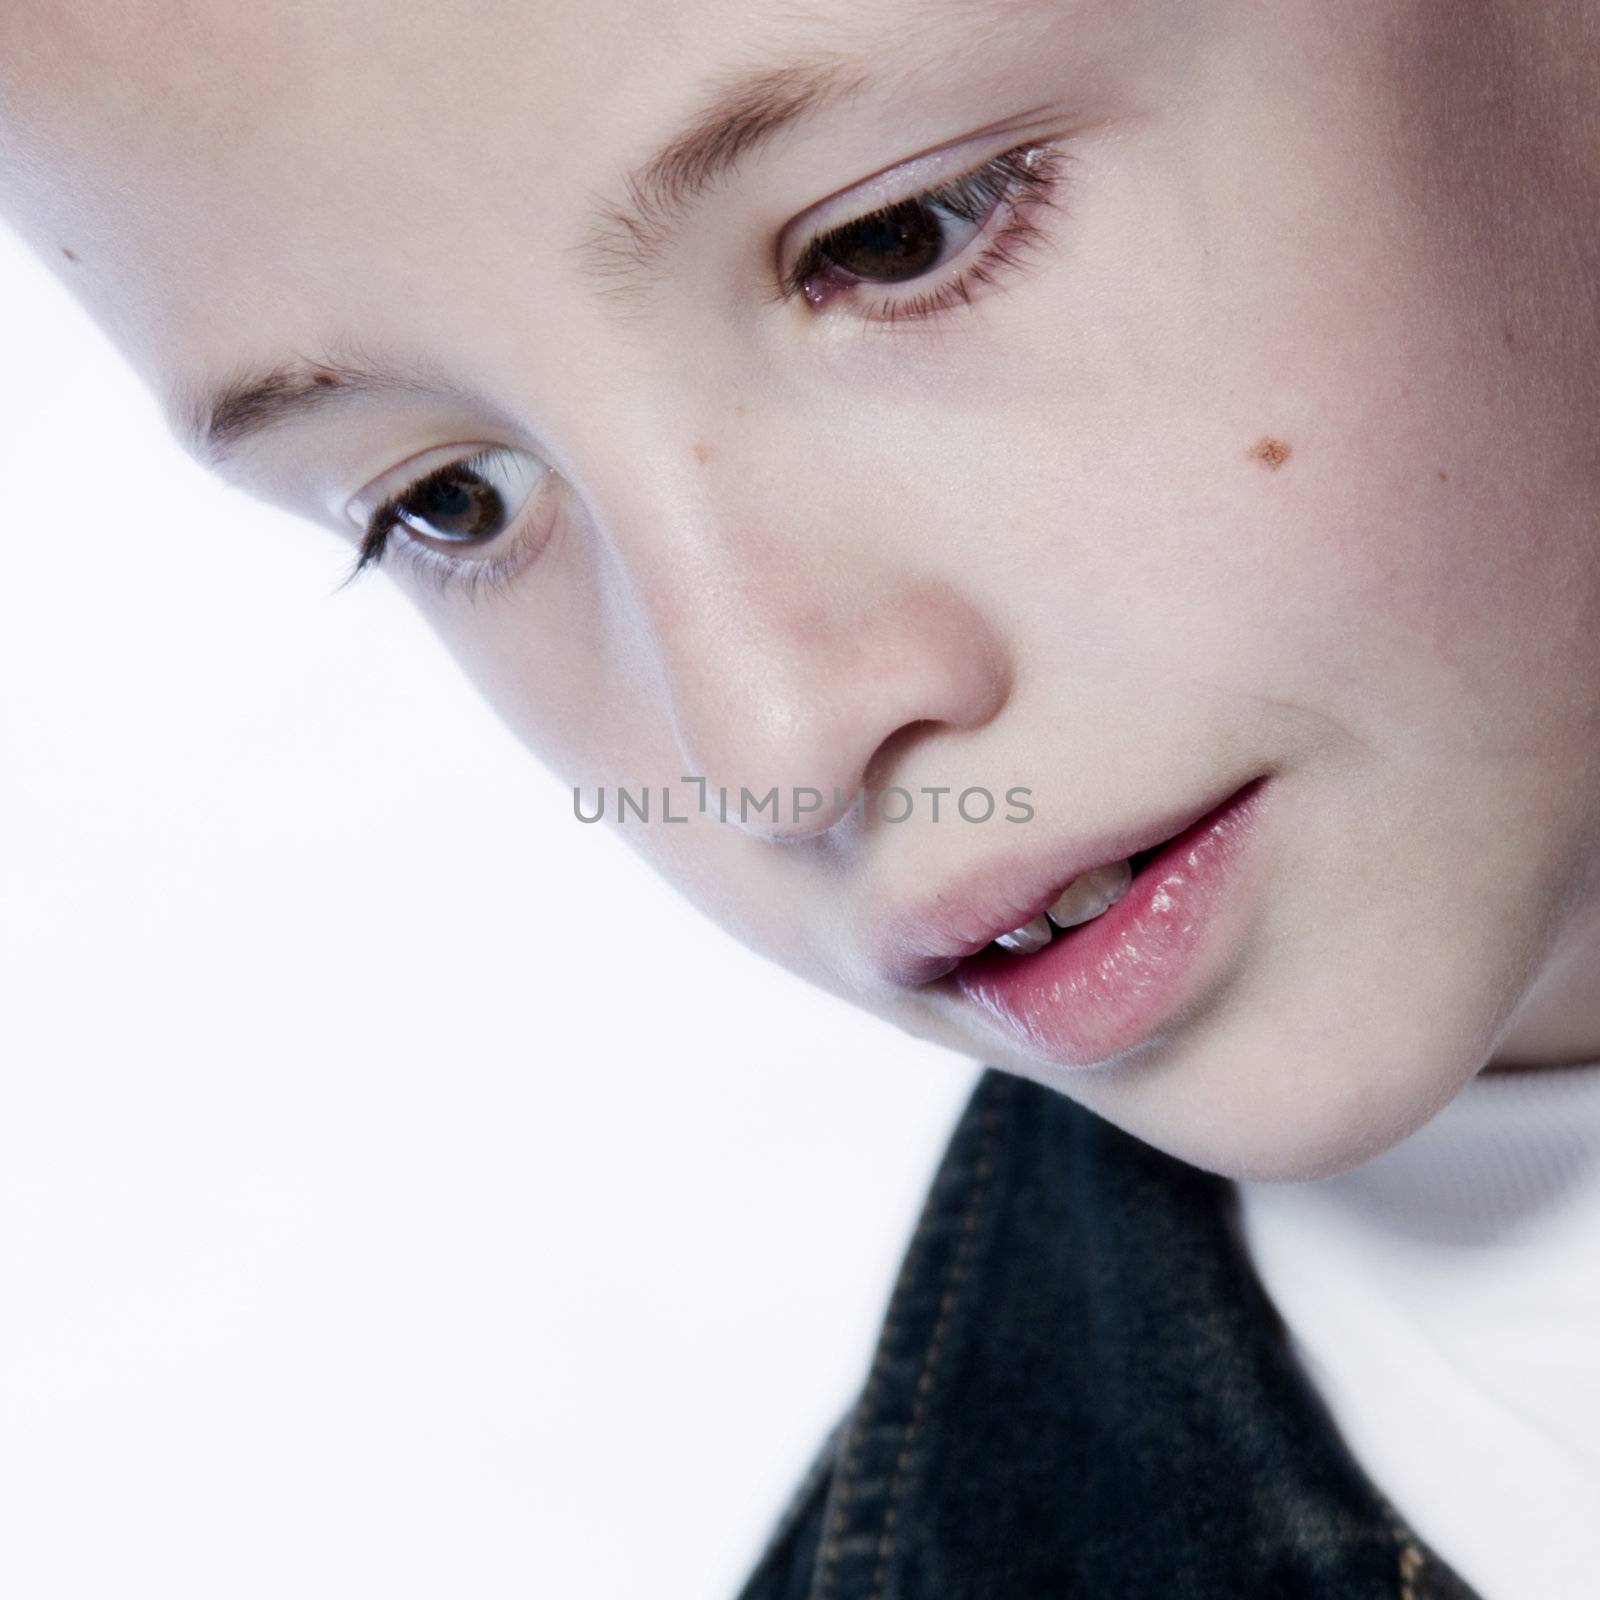 a model portrait of a young kid in the studio